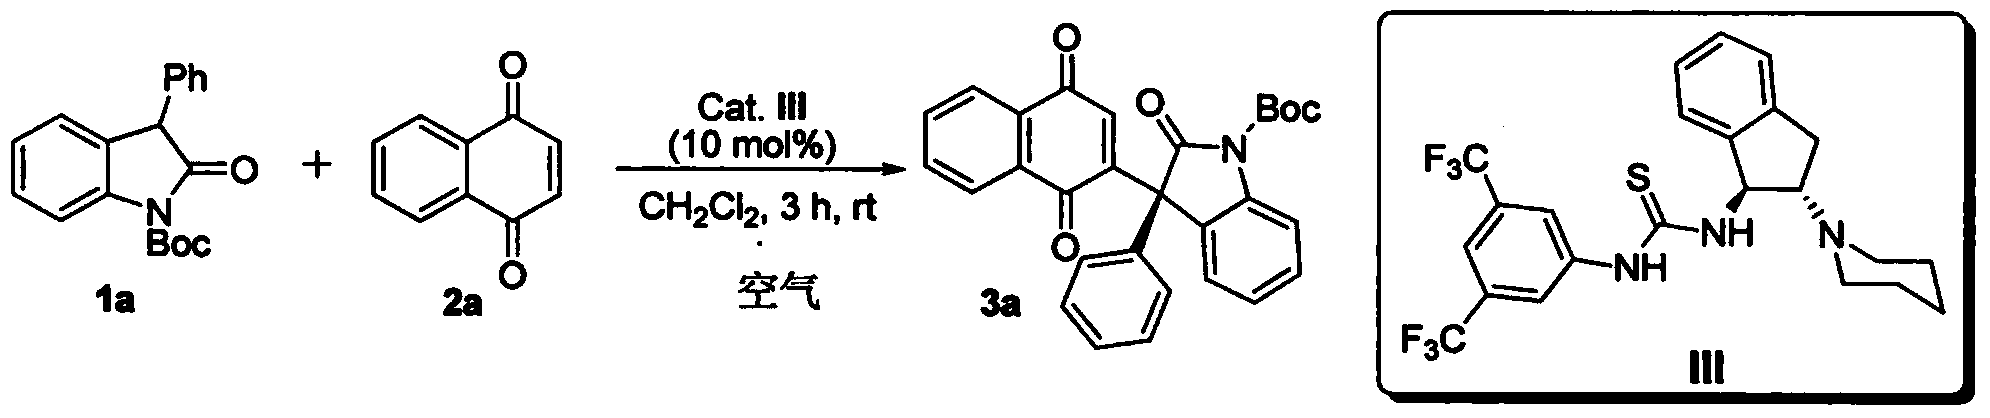 Method for asymmetric synthesis of 3,3-disubstituted-2-oxindole compound